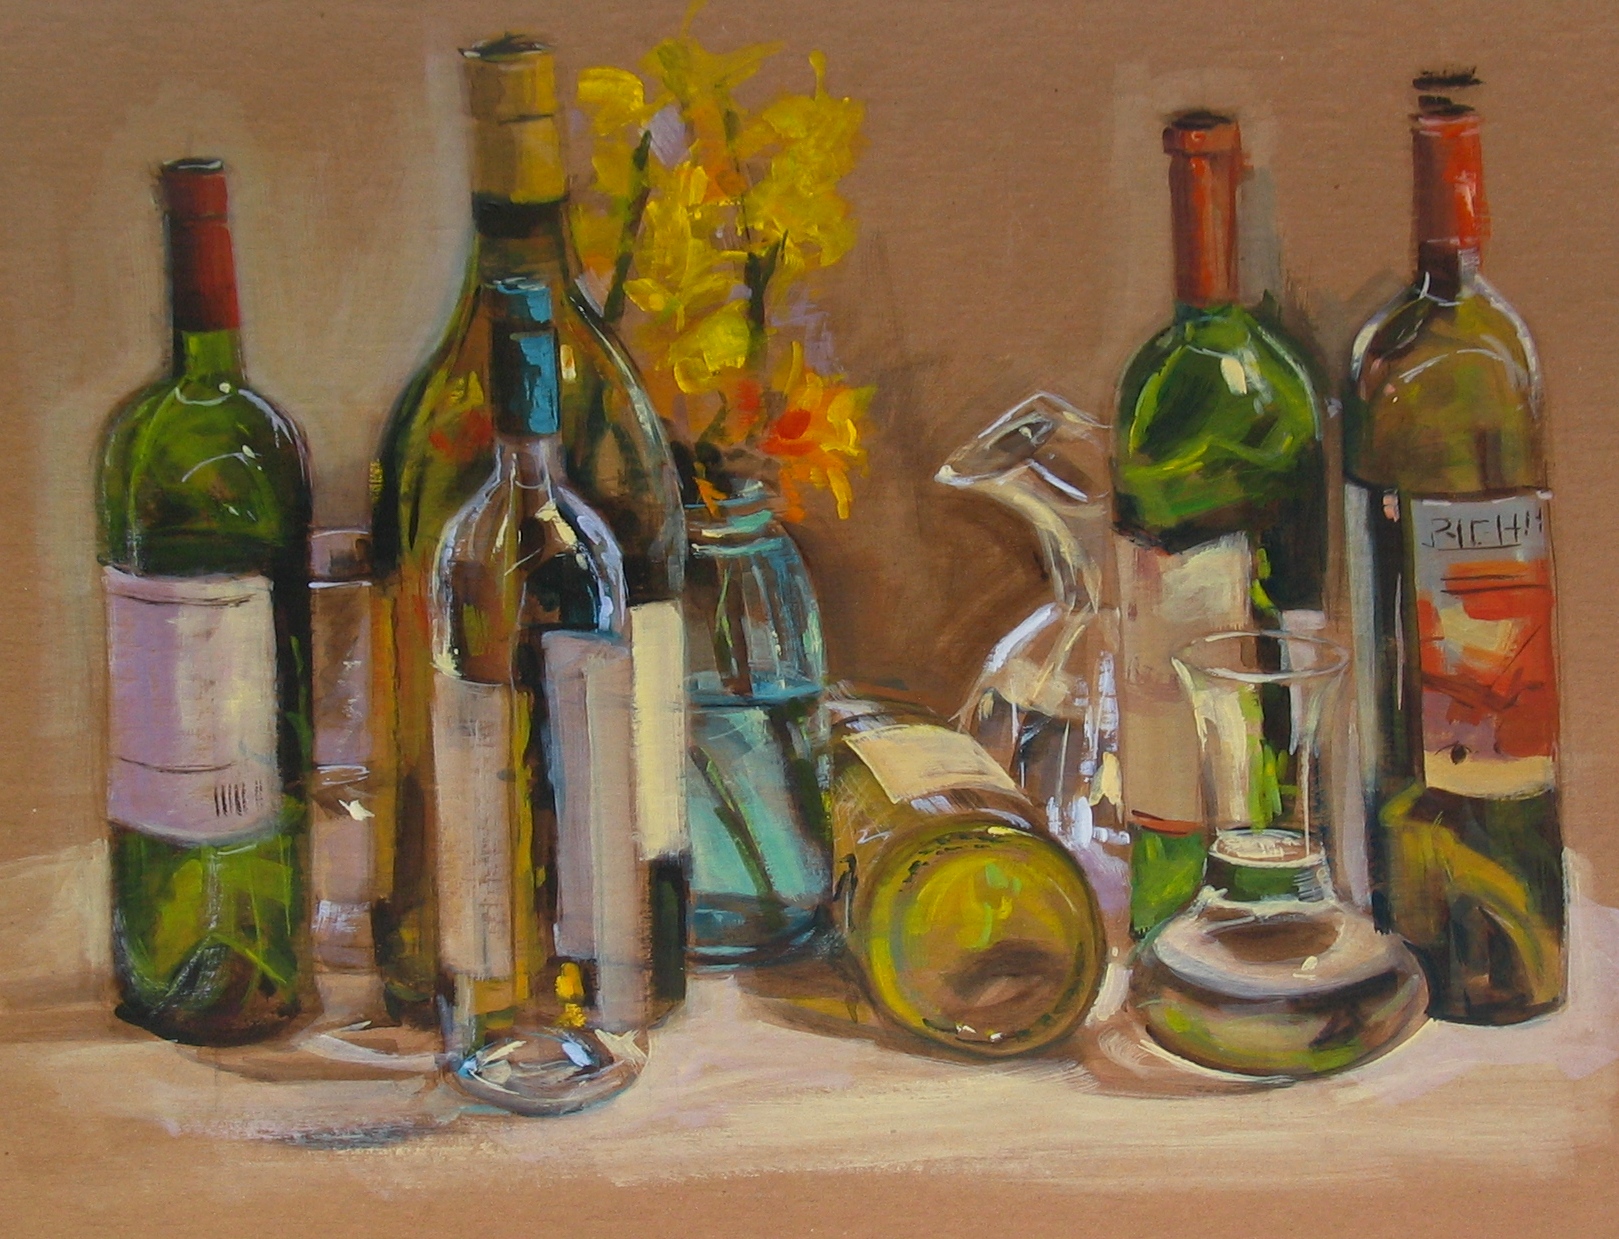 of in. paint glass glass bottles, about cardboard, with painting acrylic demo on 18x24 Acrylic